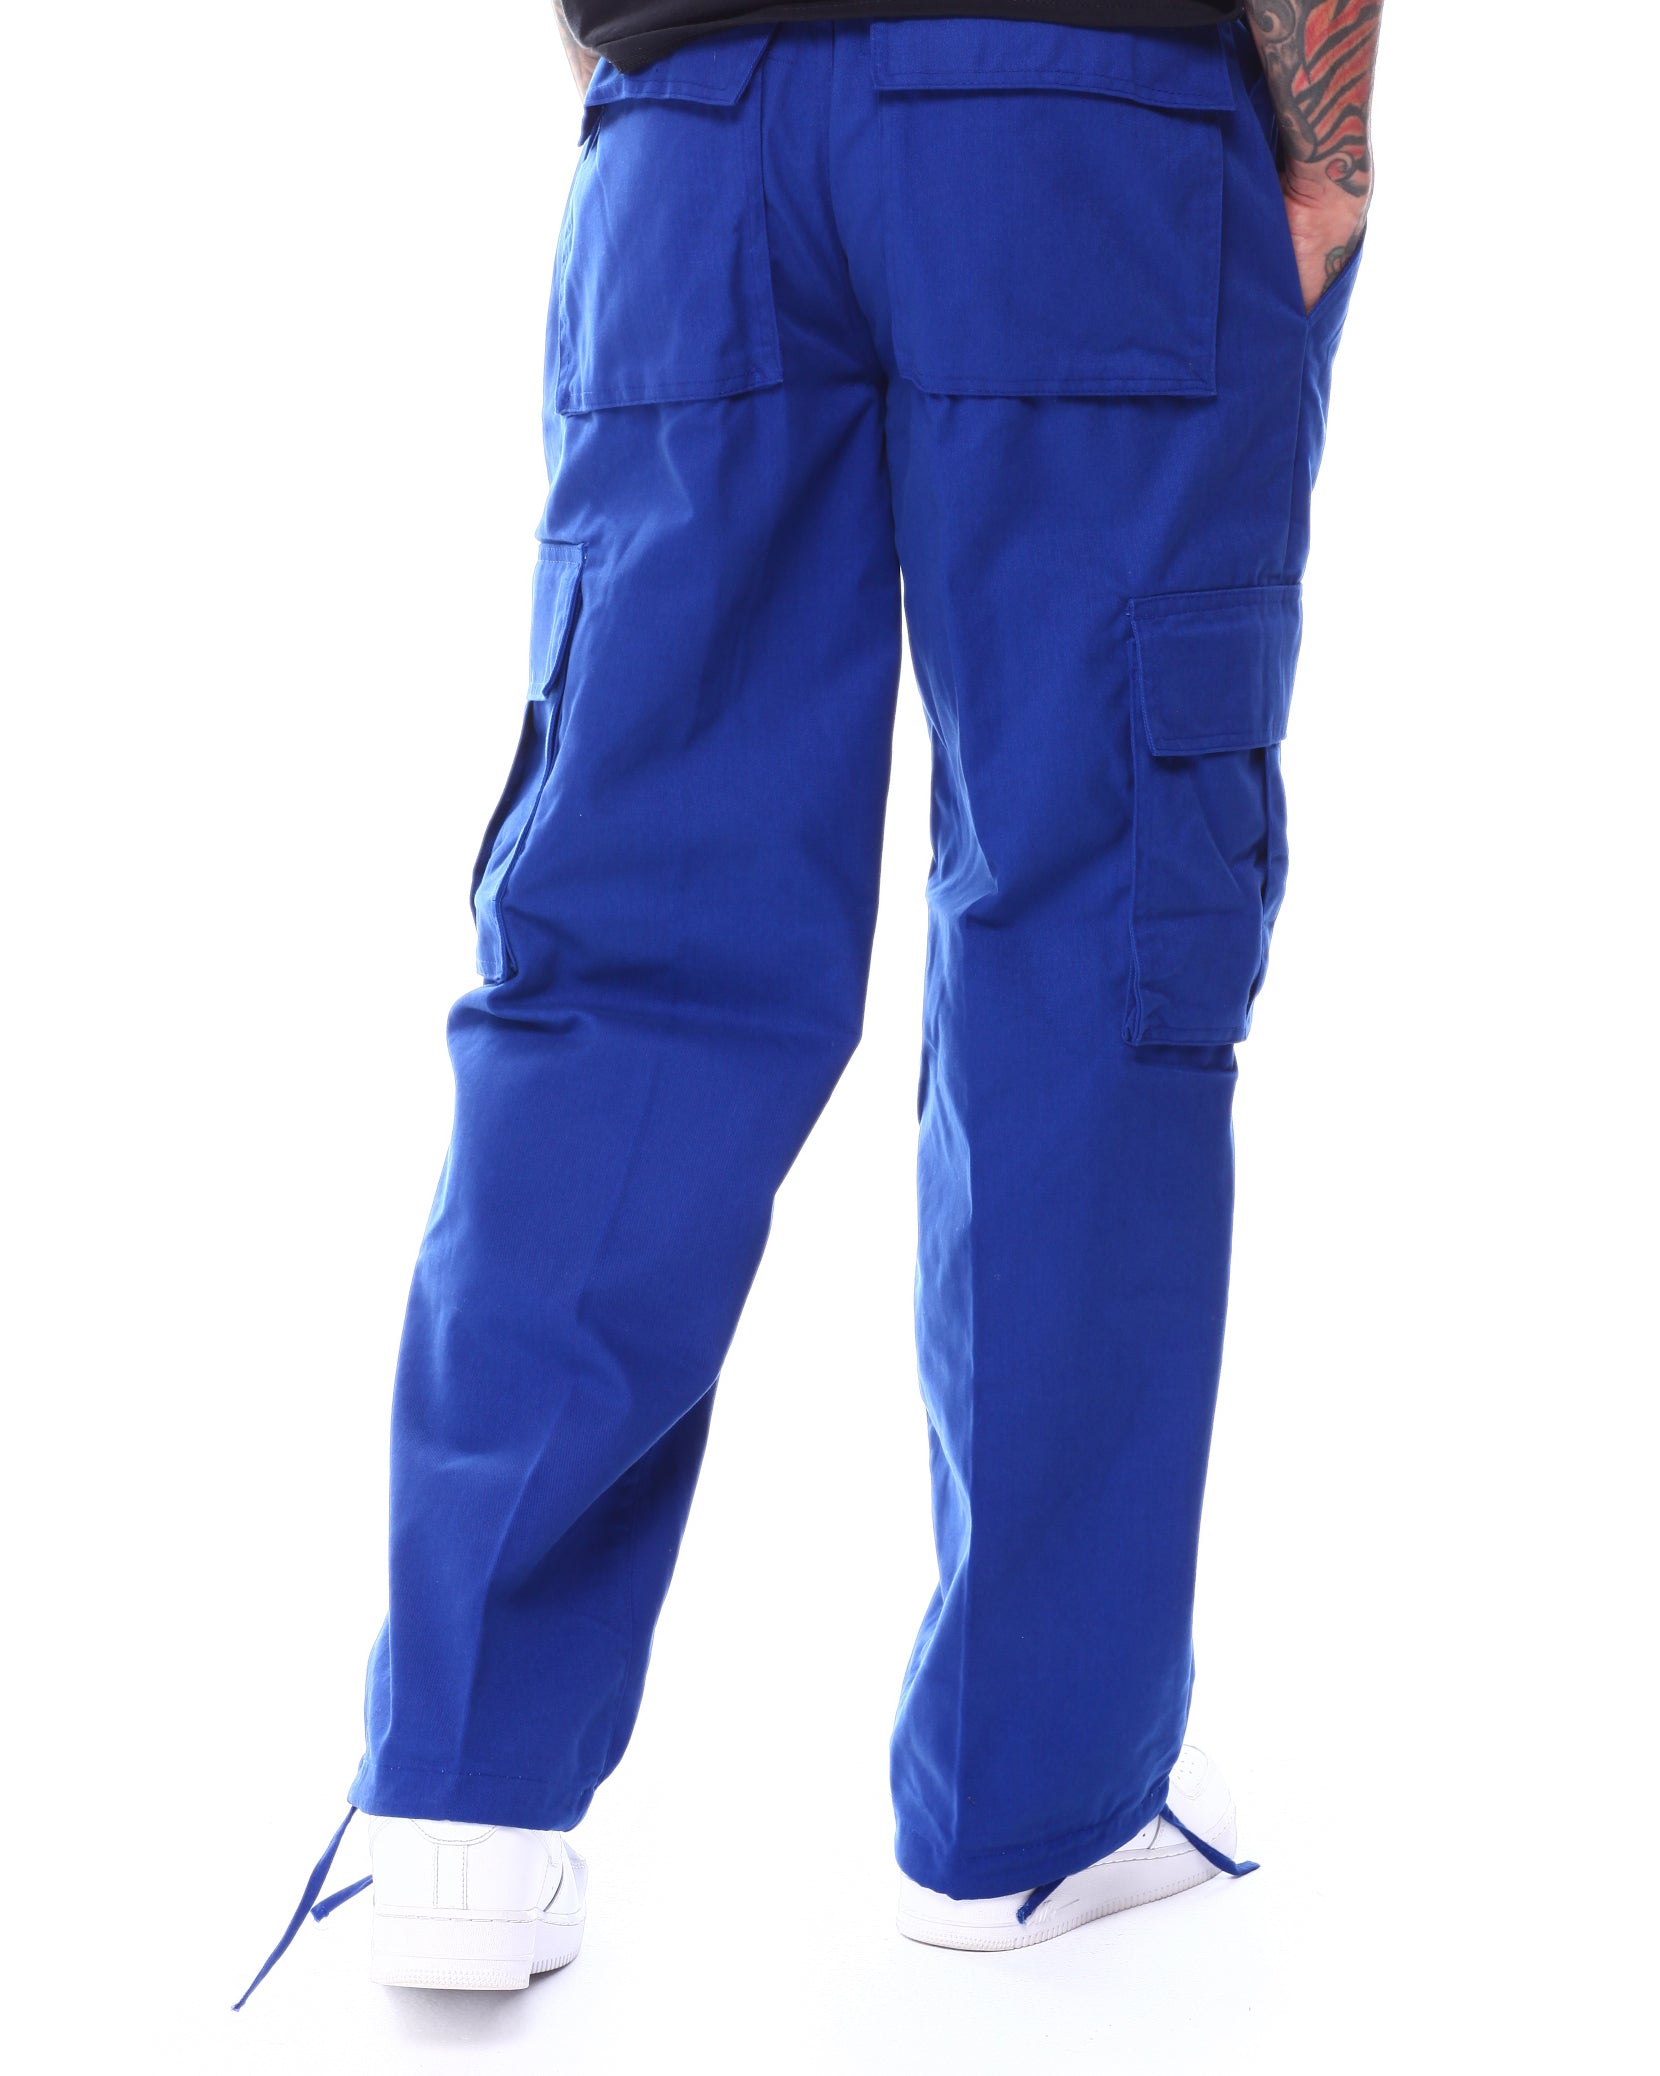 CARGO TWILL PANTS WITH BELT - ROYAL